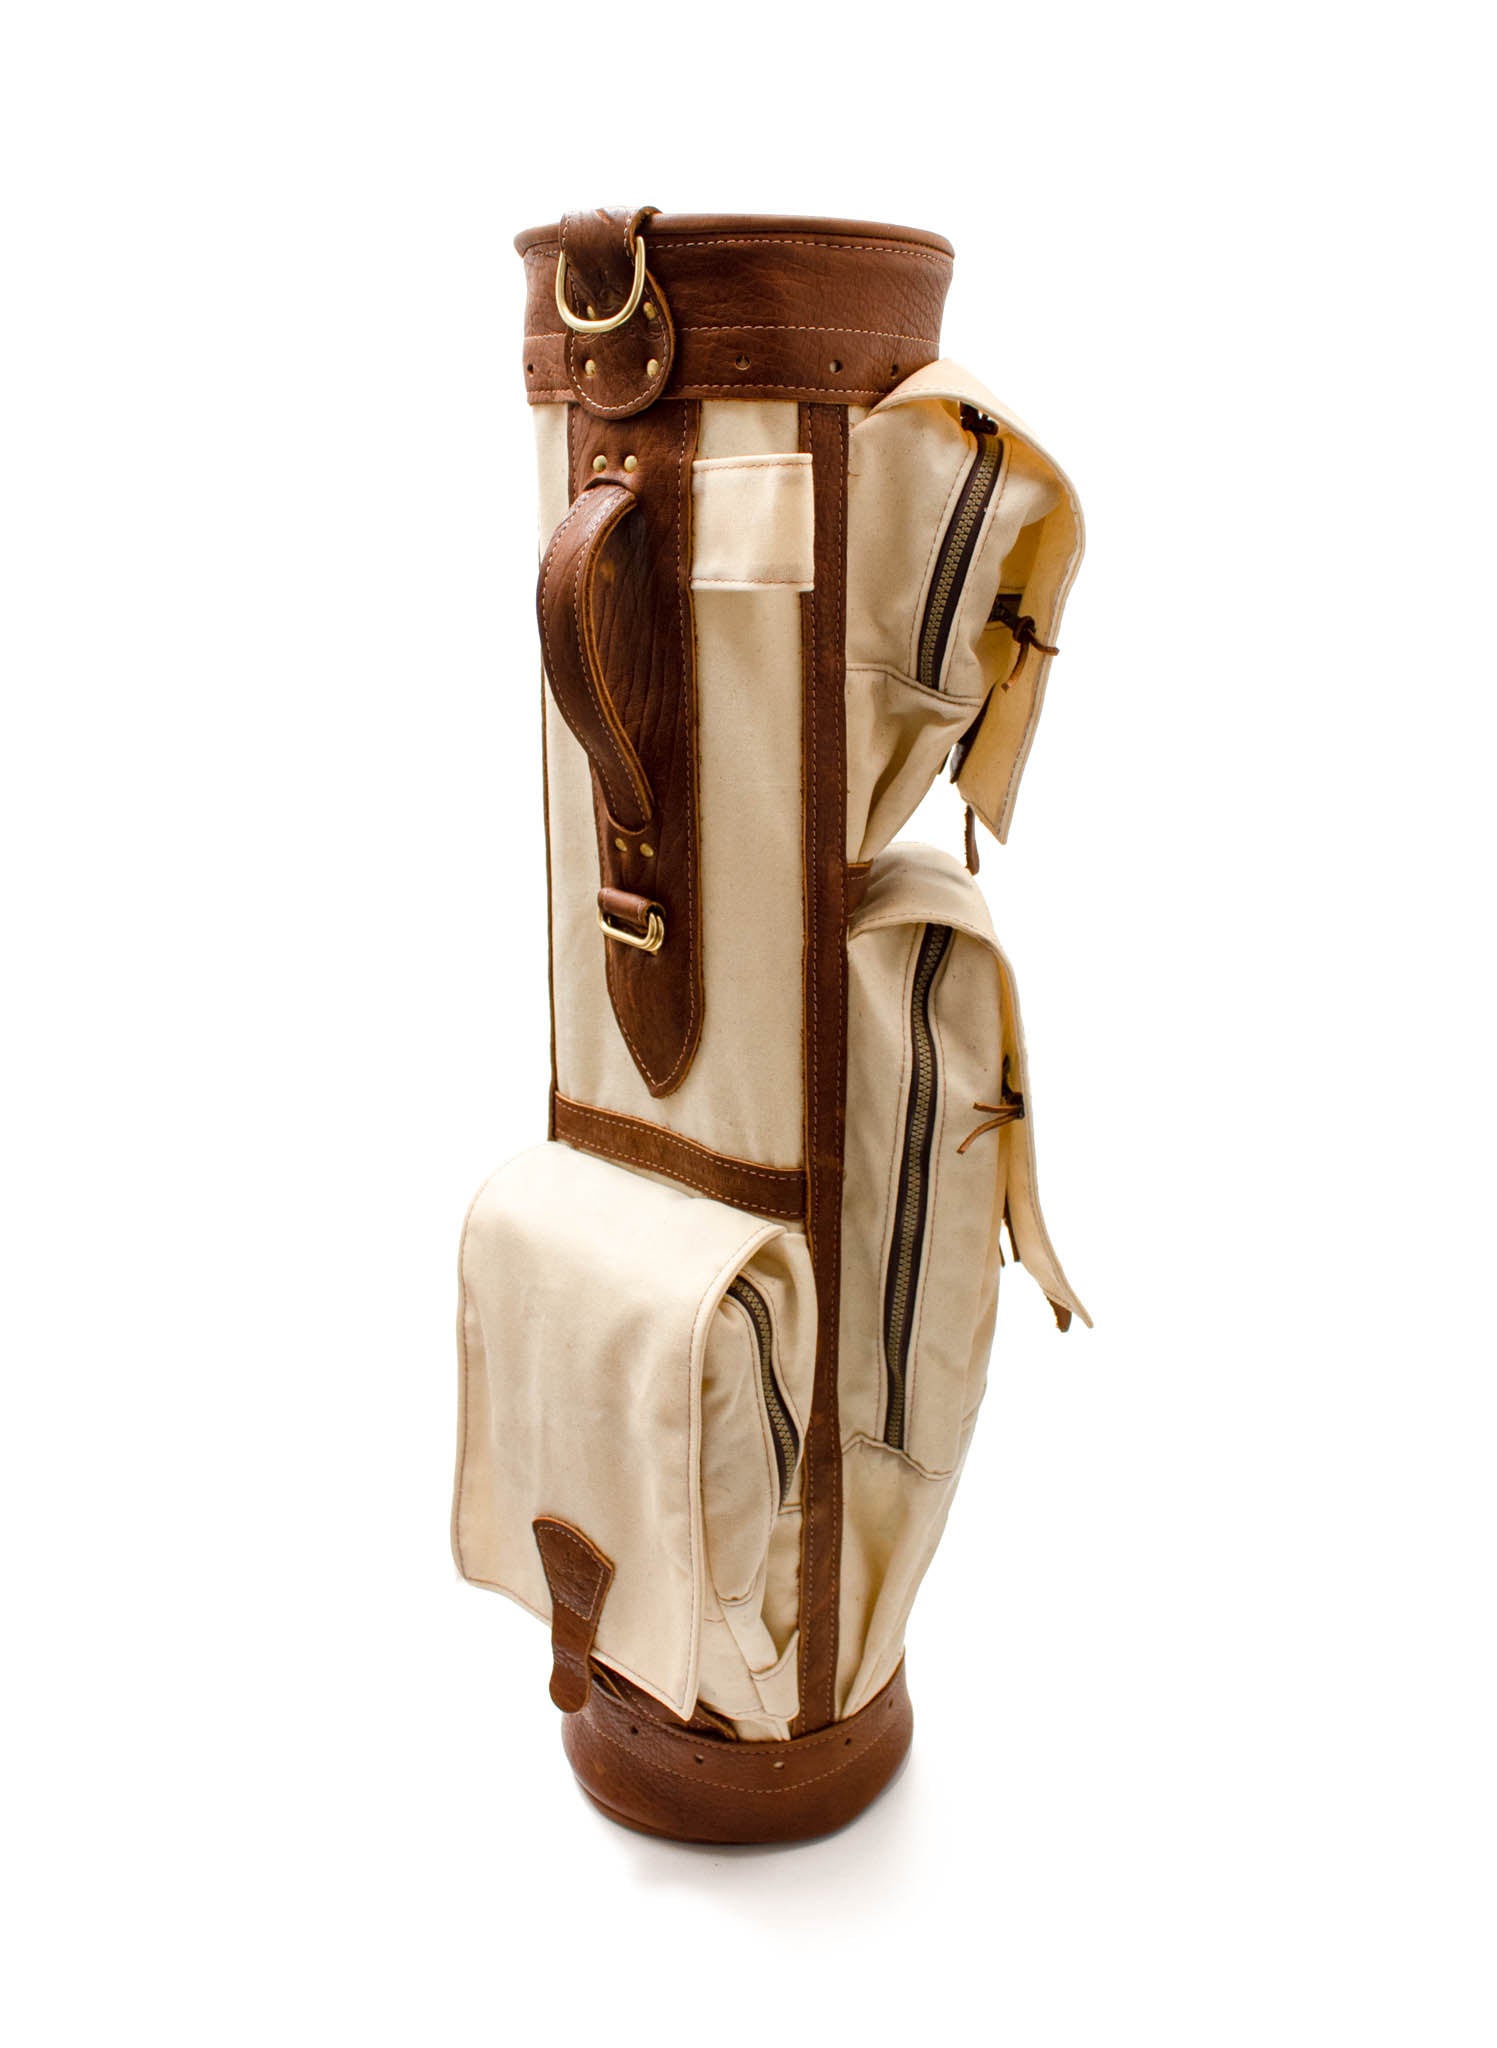 New Luxury Leather Golf Bag The Kennedy Line Is Introduced Redefining  Style in the Sport  Fashion Mannuscript